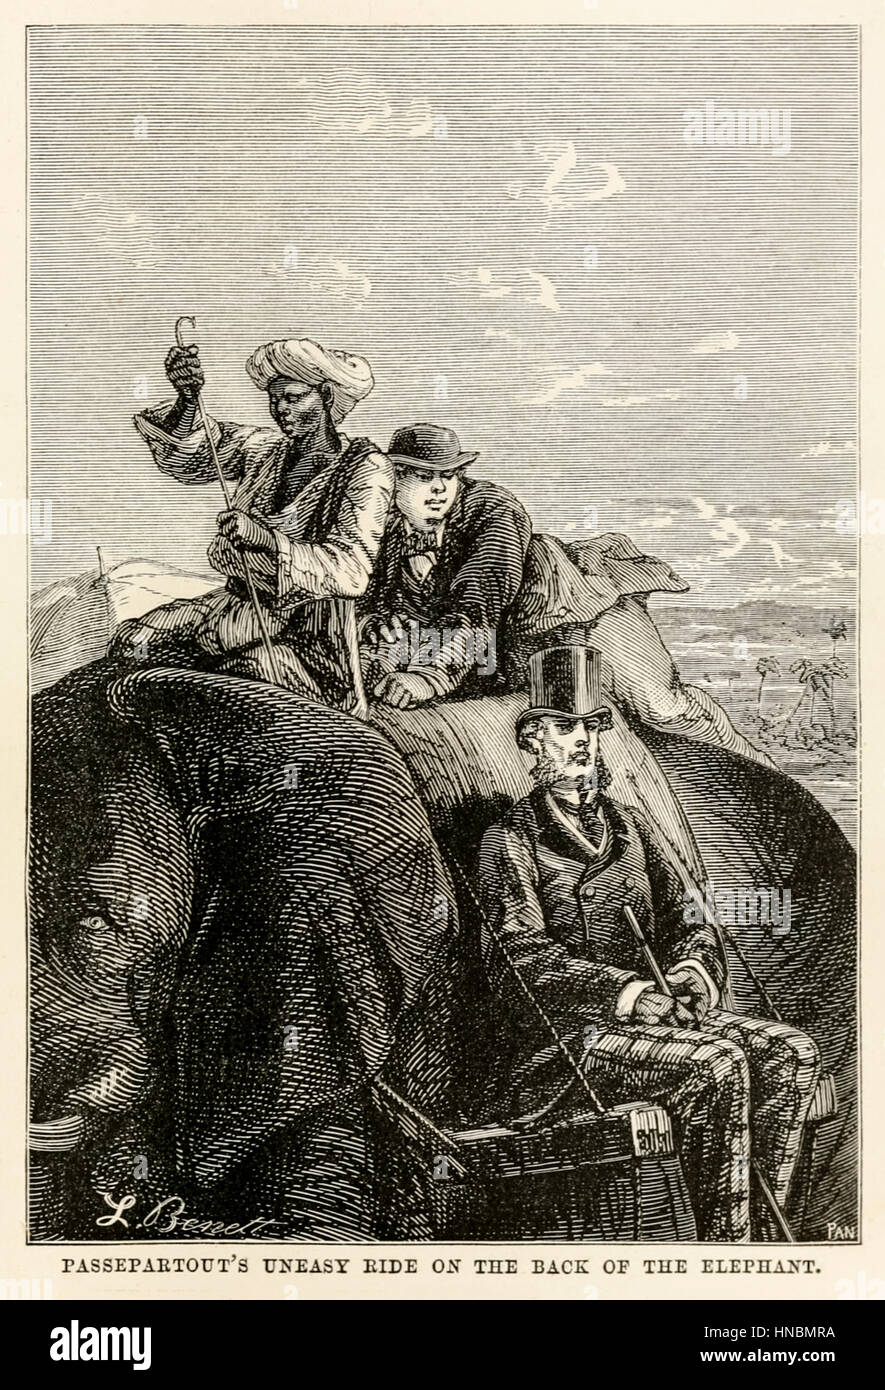 “Passepartout’s uneasy ride on the back of the elephant.” from ‘Around the World in Eighty Days’ by Jules Verne (1828-1905) published in 1873 illustration by Léon Benett (1839-1917) and by Adolphe François Pannemaker (1822-1900). Stock Photo